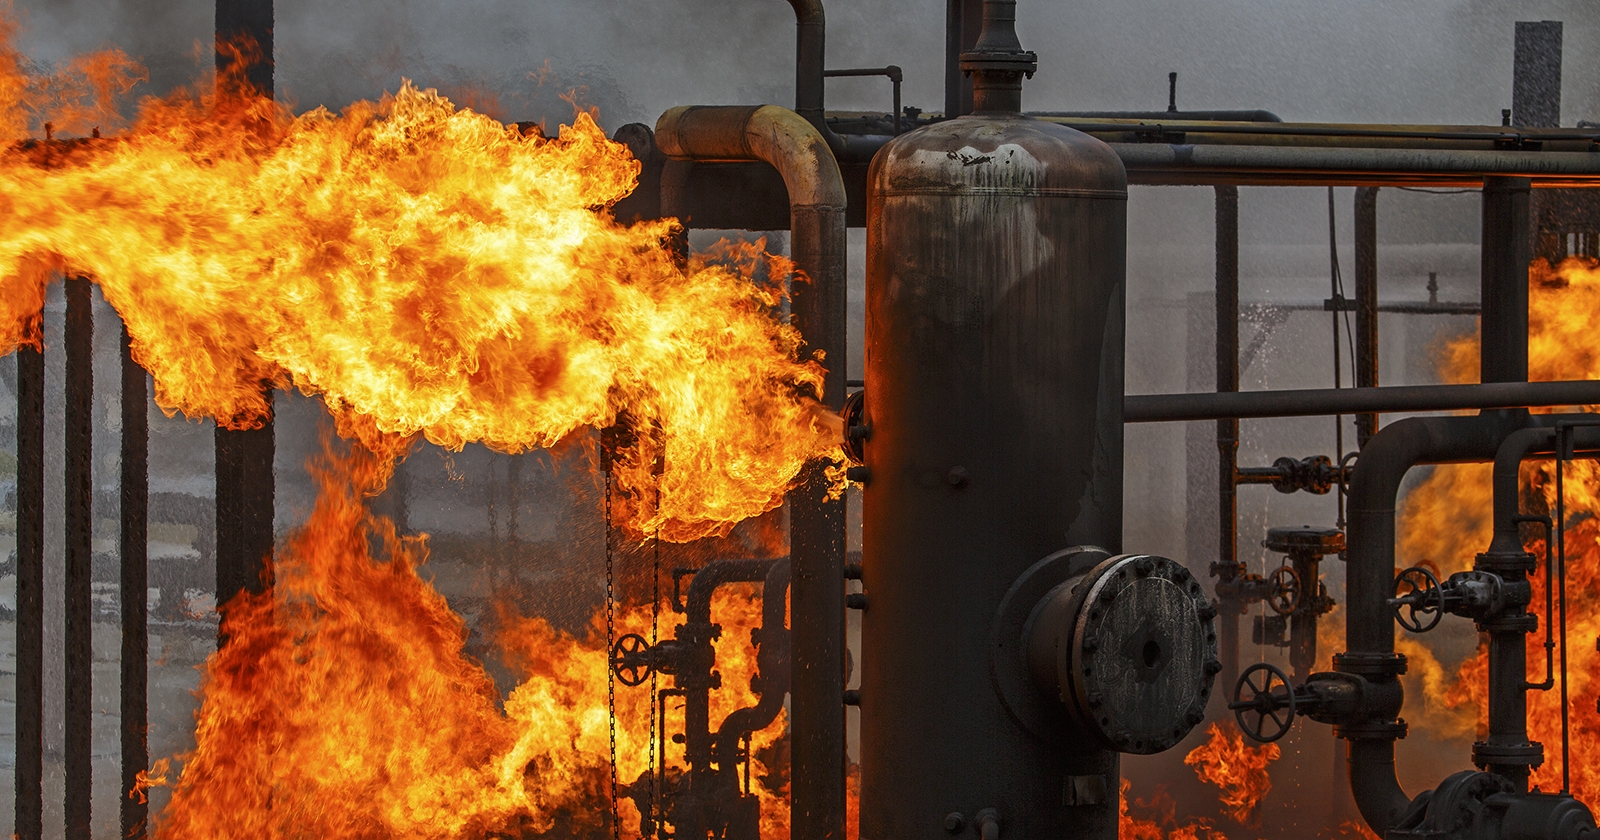 Industrial gas pipes in a blaze of fire. Exponent performs investigations of fluid combustion systems.